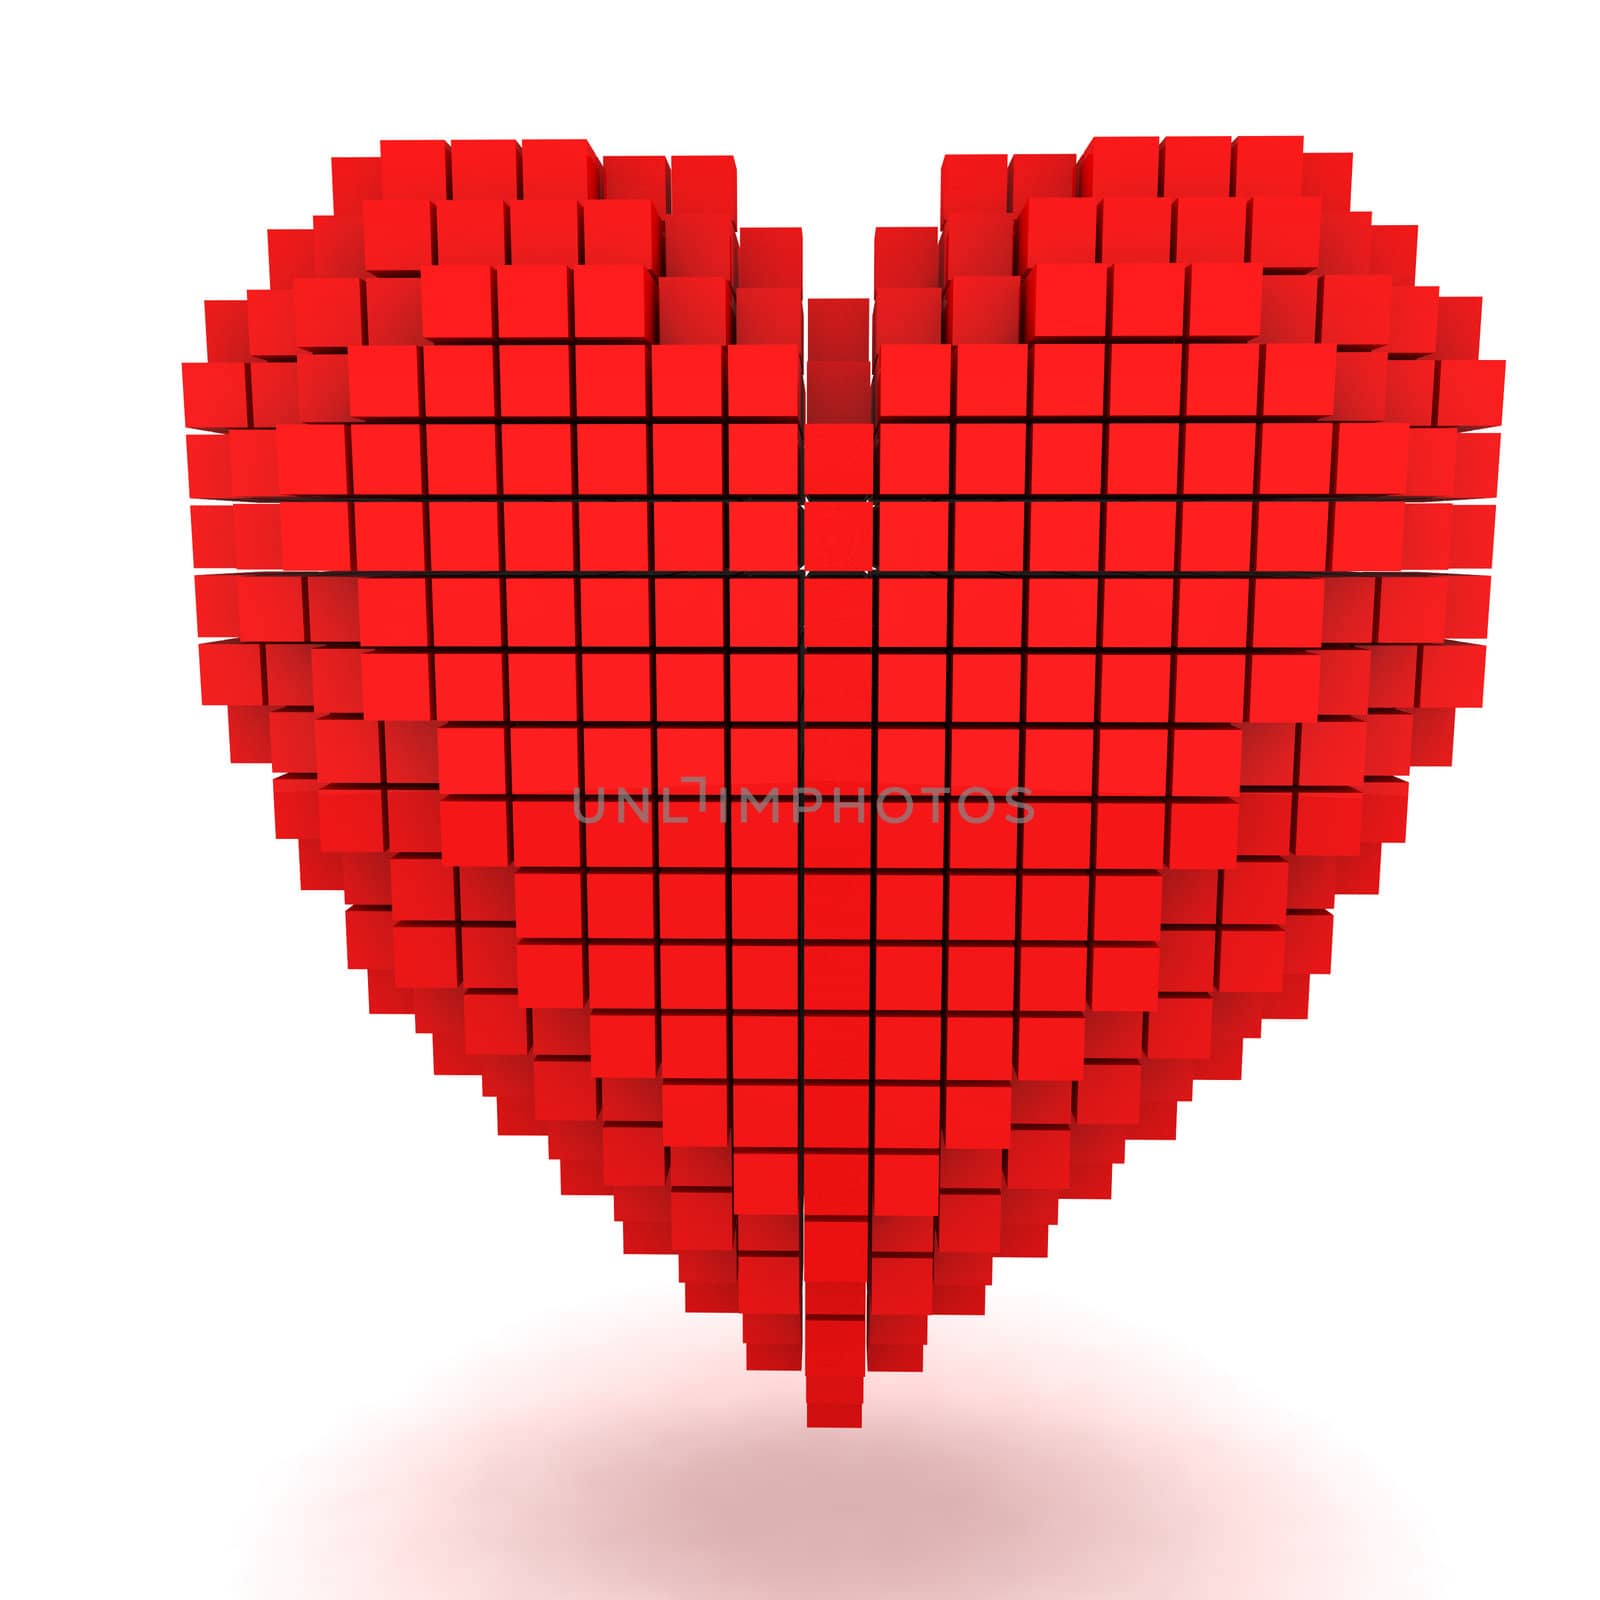 Three-dimensional red heart isolated on the white background